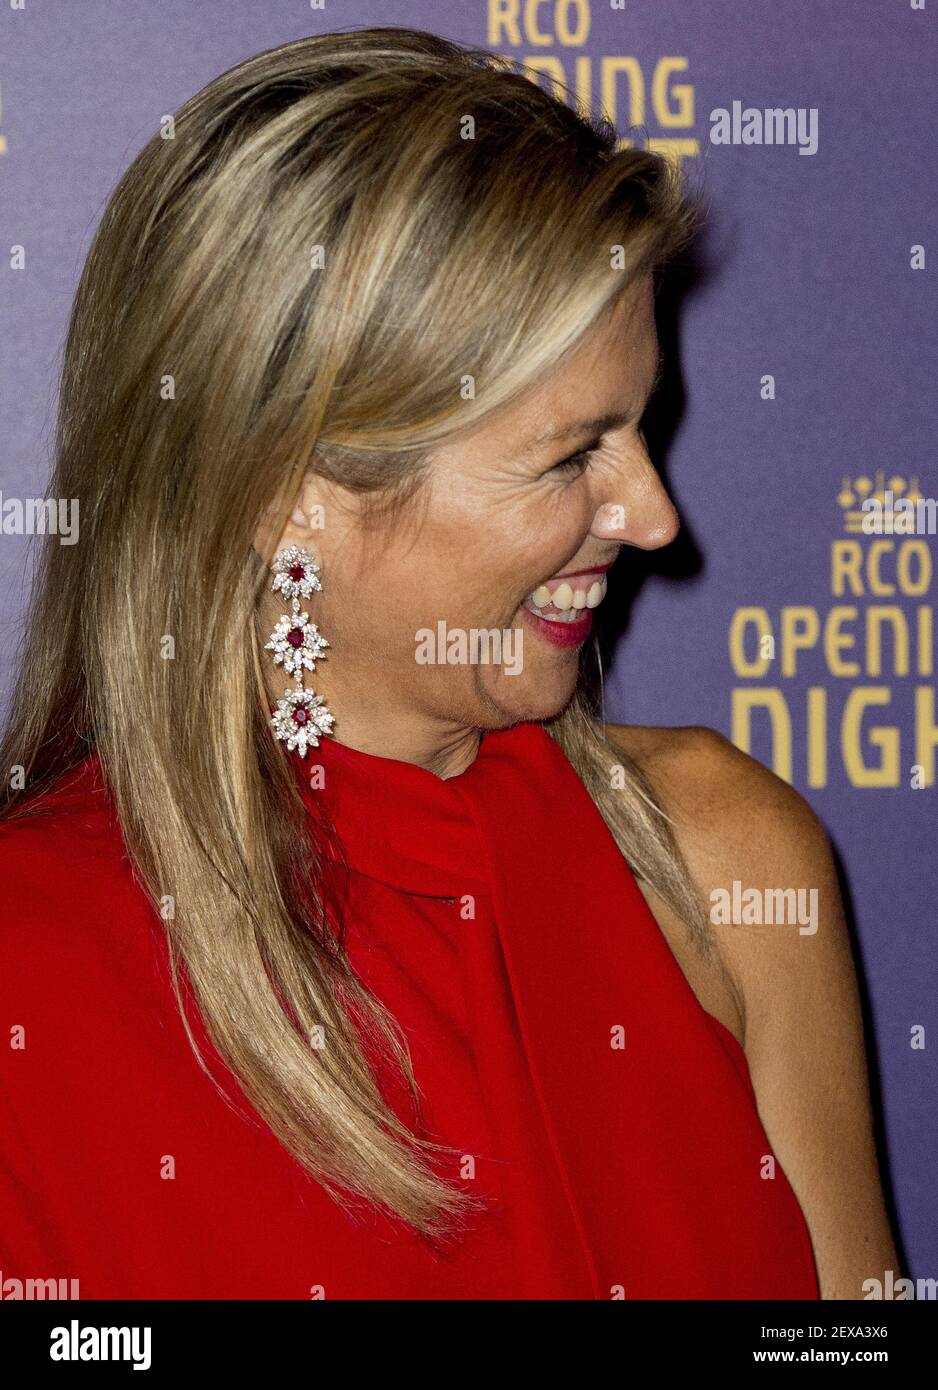 AMSTERDAM - Queen Maxima after the concert with conductor Daniele Gatti. The concert with guest soloist Yo-Yo Ma is the grand opening of the new season of the Royal Concertgebouw Orchestra. Sept. 10, 2015 (Photo by Robin Utrecht) *** Please Use Credit from Credit Field *** Stock Photo